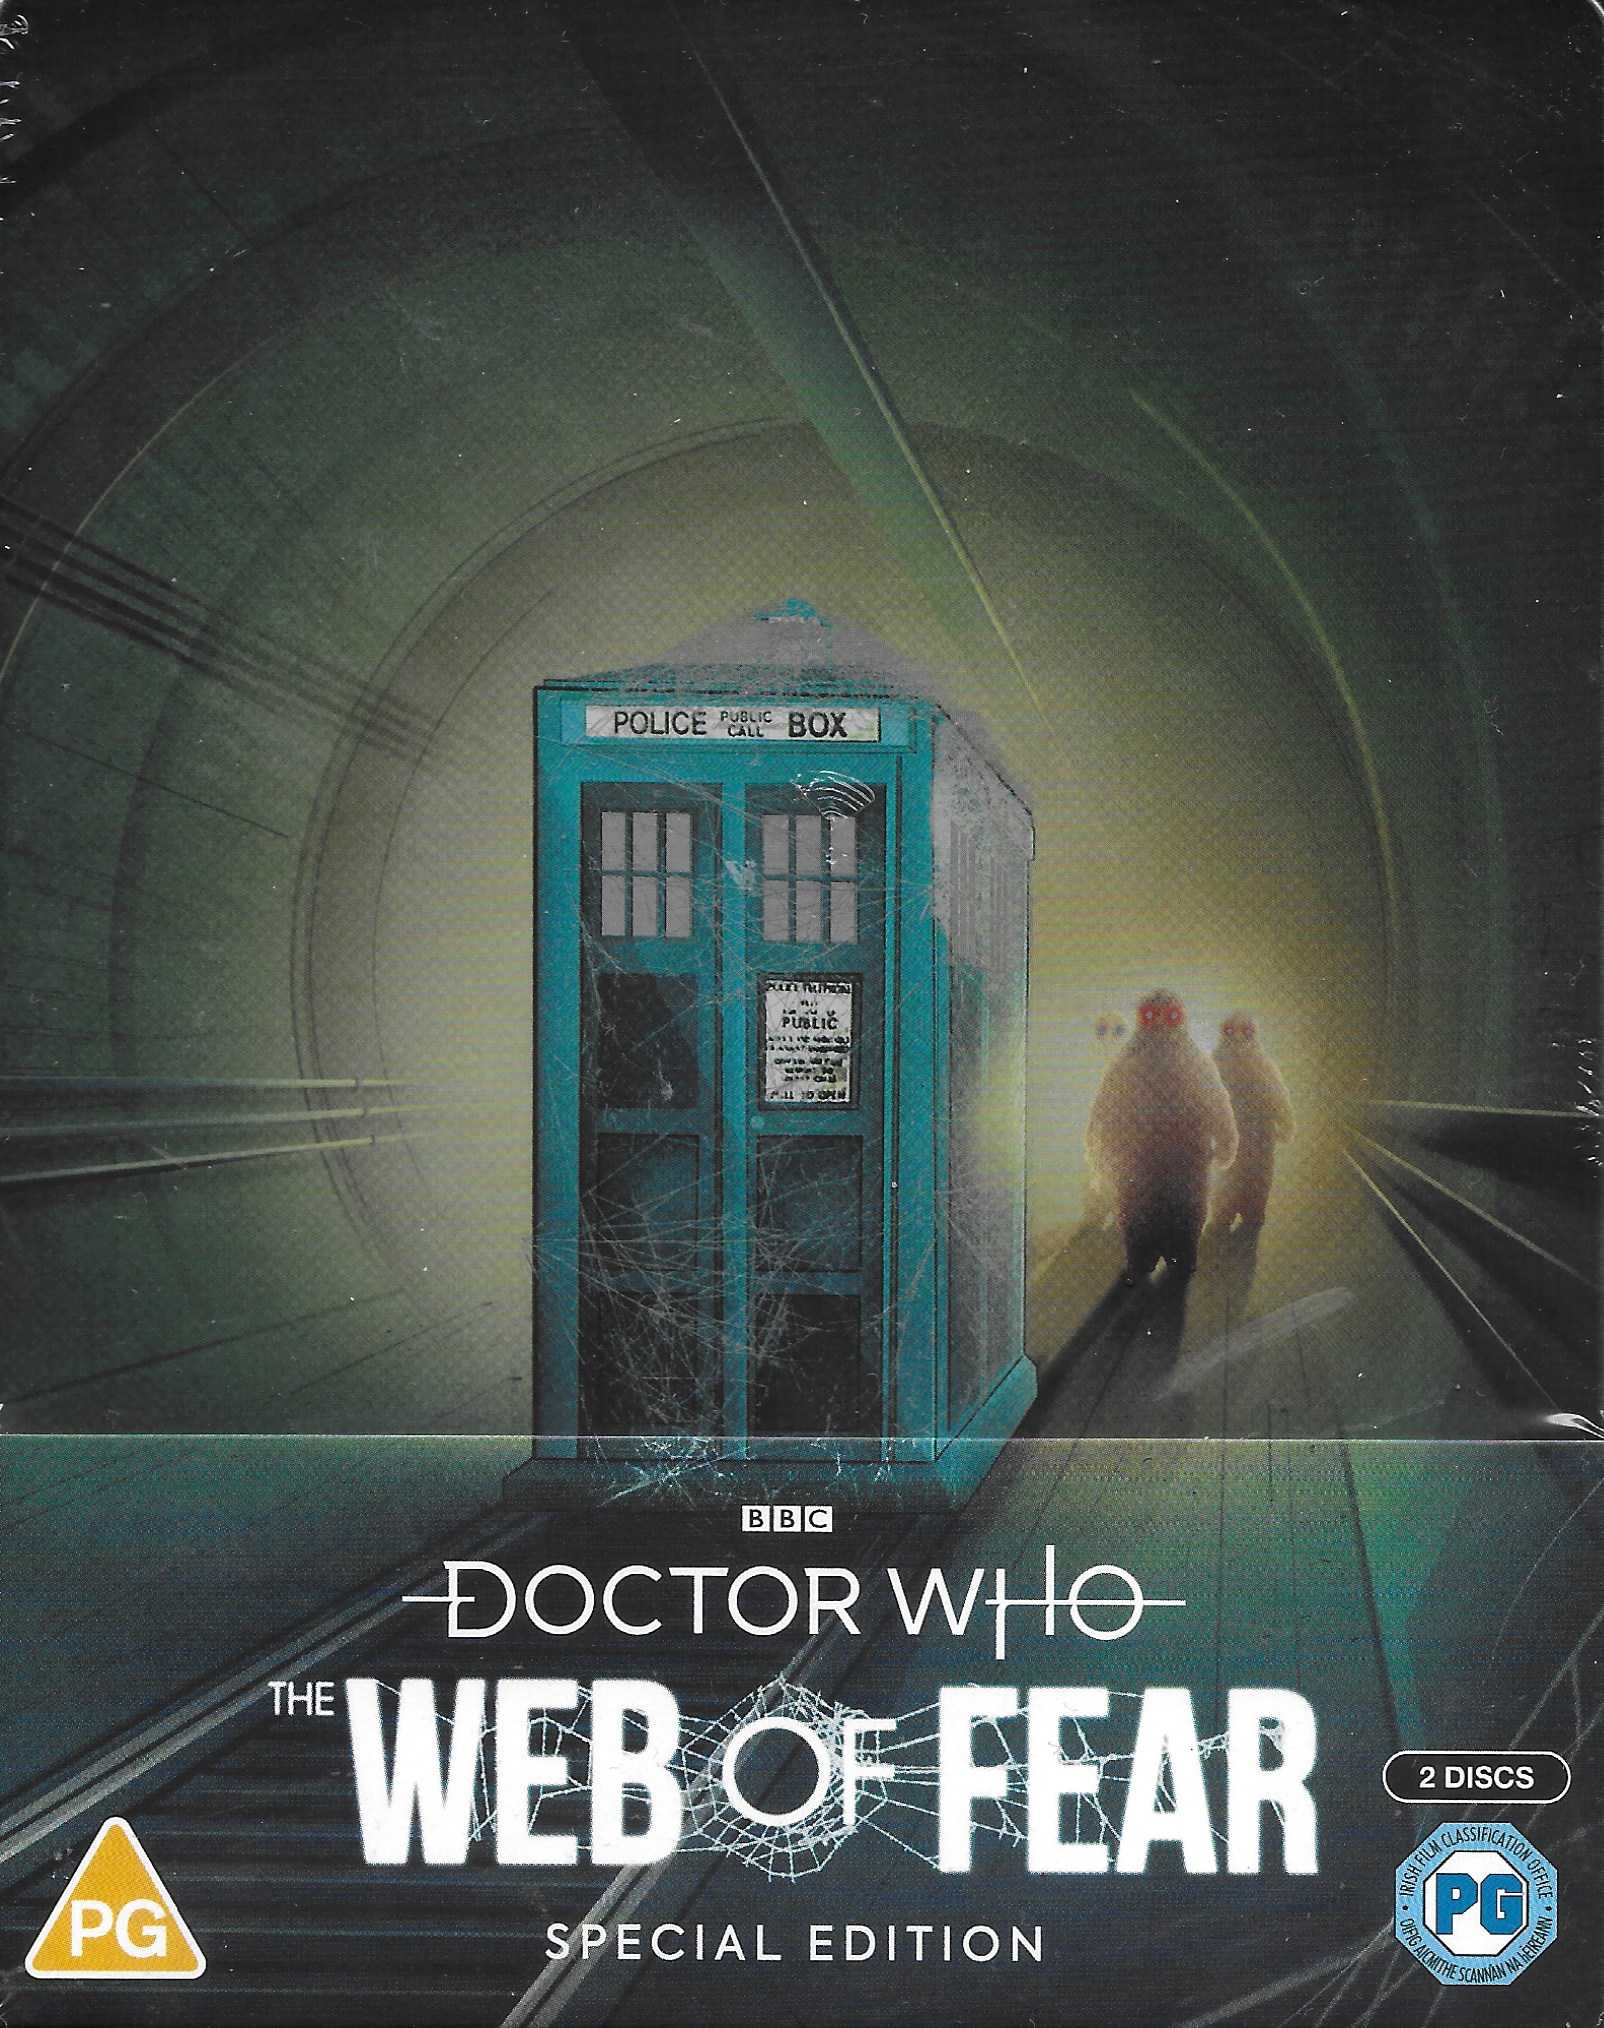 Picture of BBCBD 0522 Doctor Who - The web of fear by artist Mervyn Haisman / Henry Lincoln from the BBC records and Tapes library